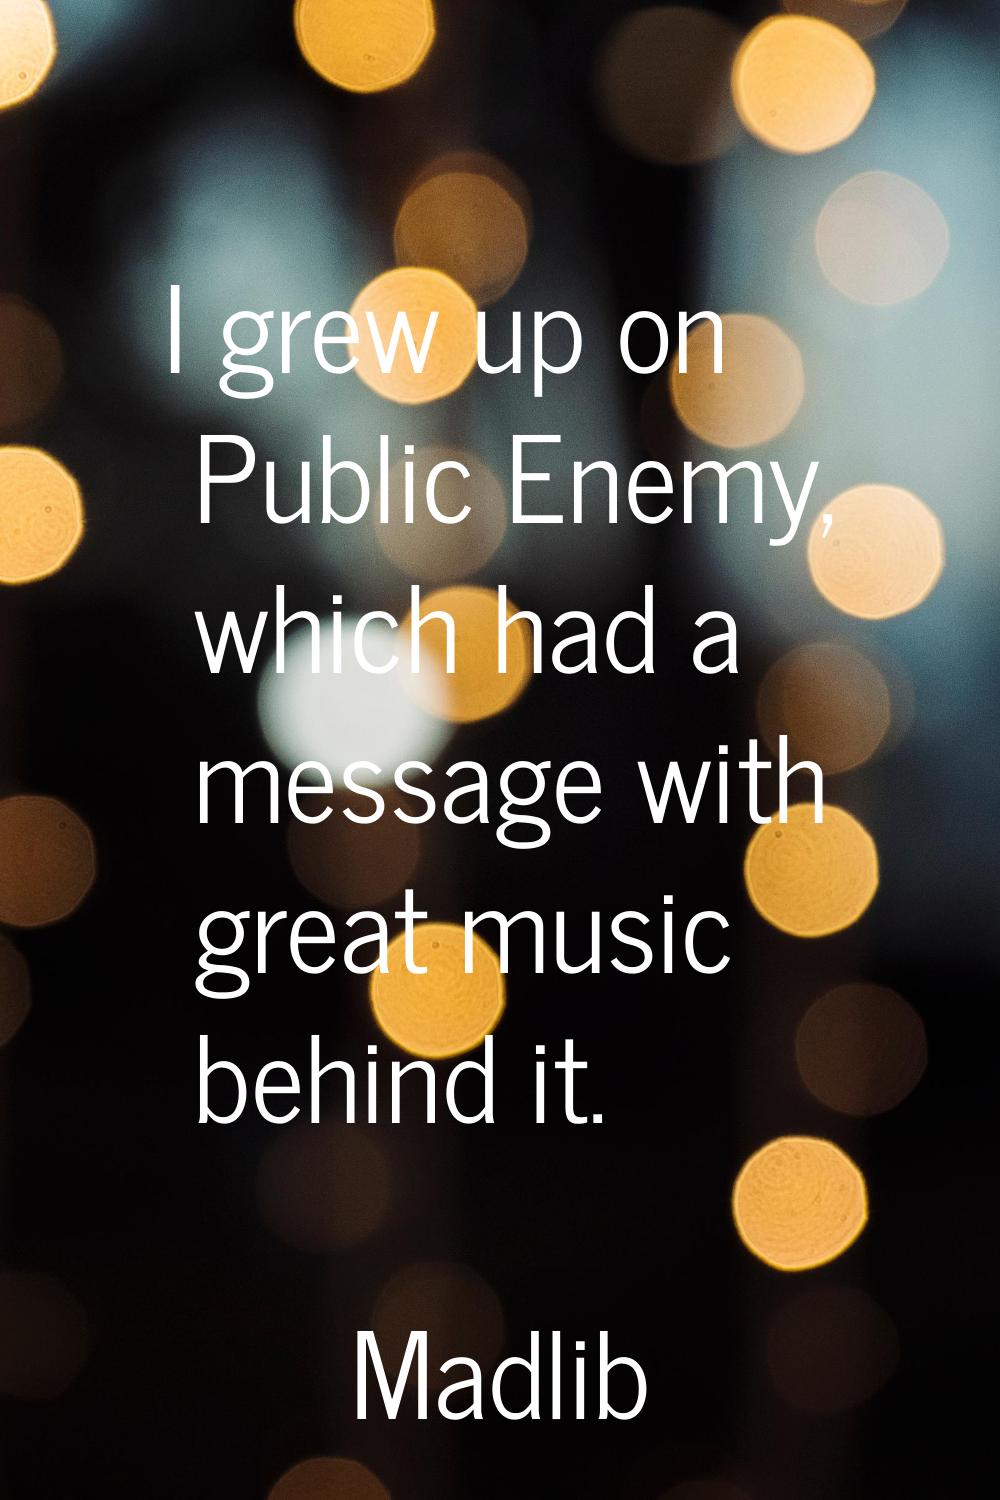 I grew up on Public Enemy, which had a message with great music behind it.